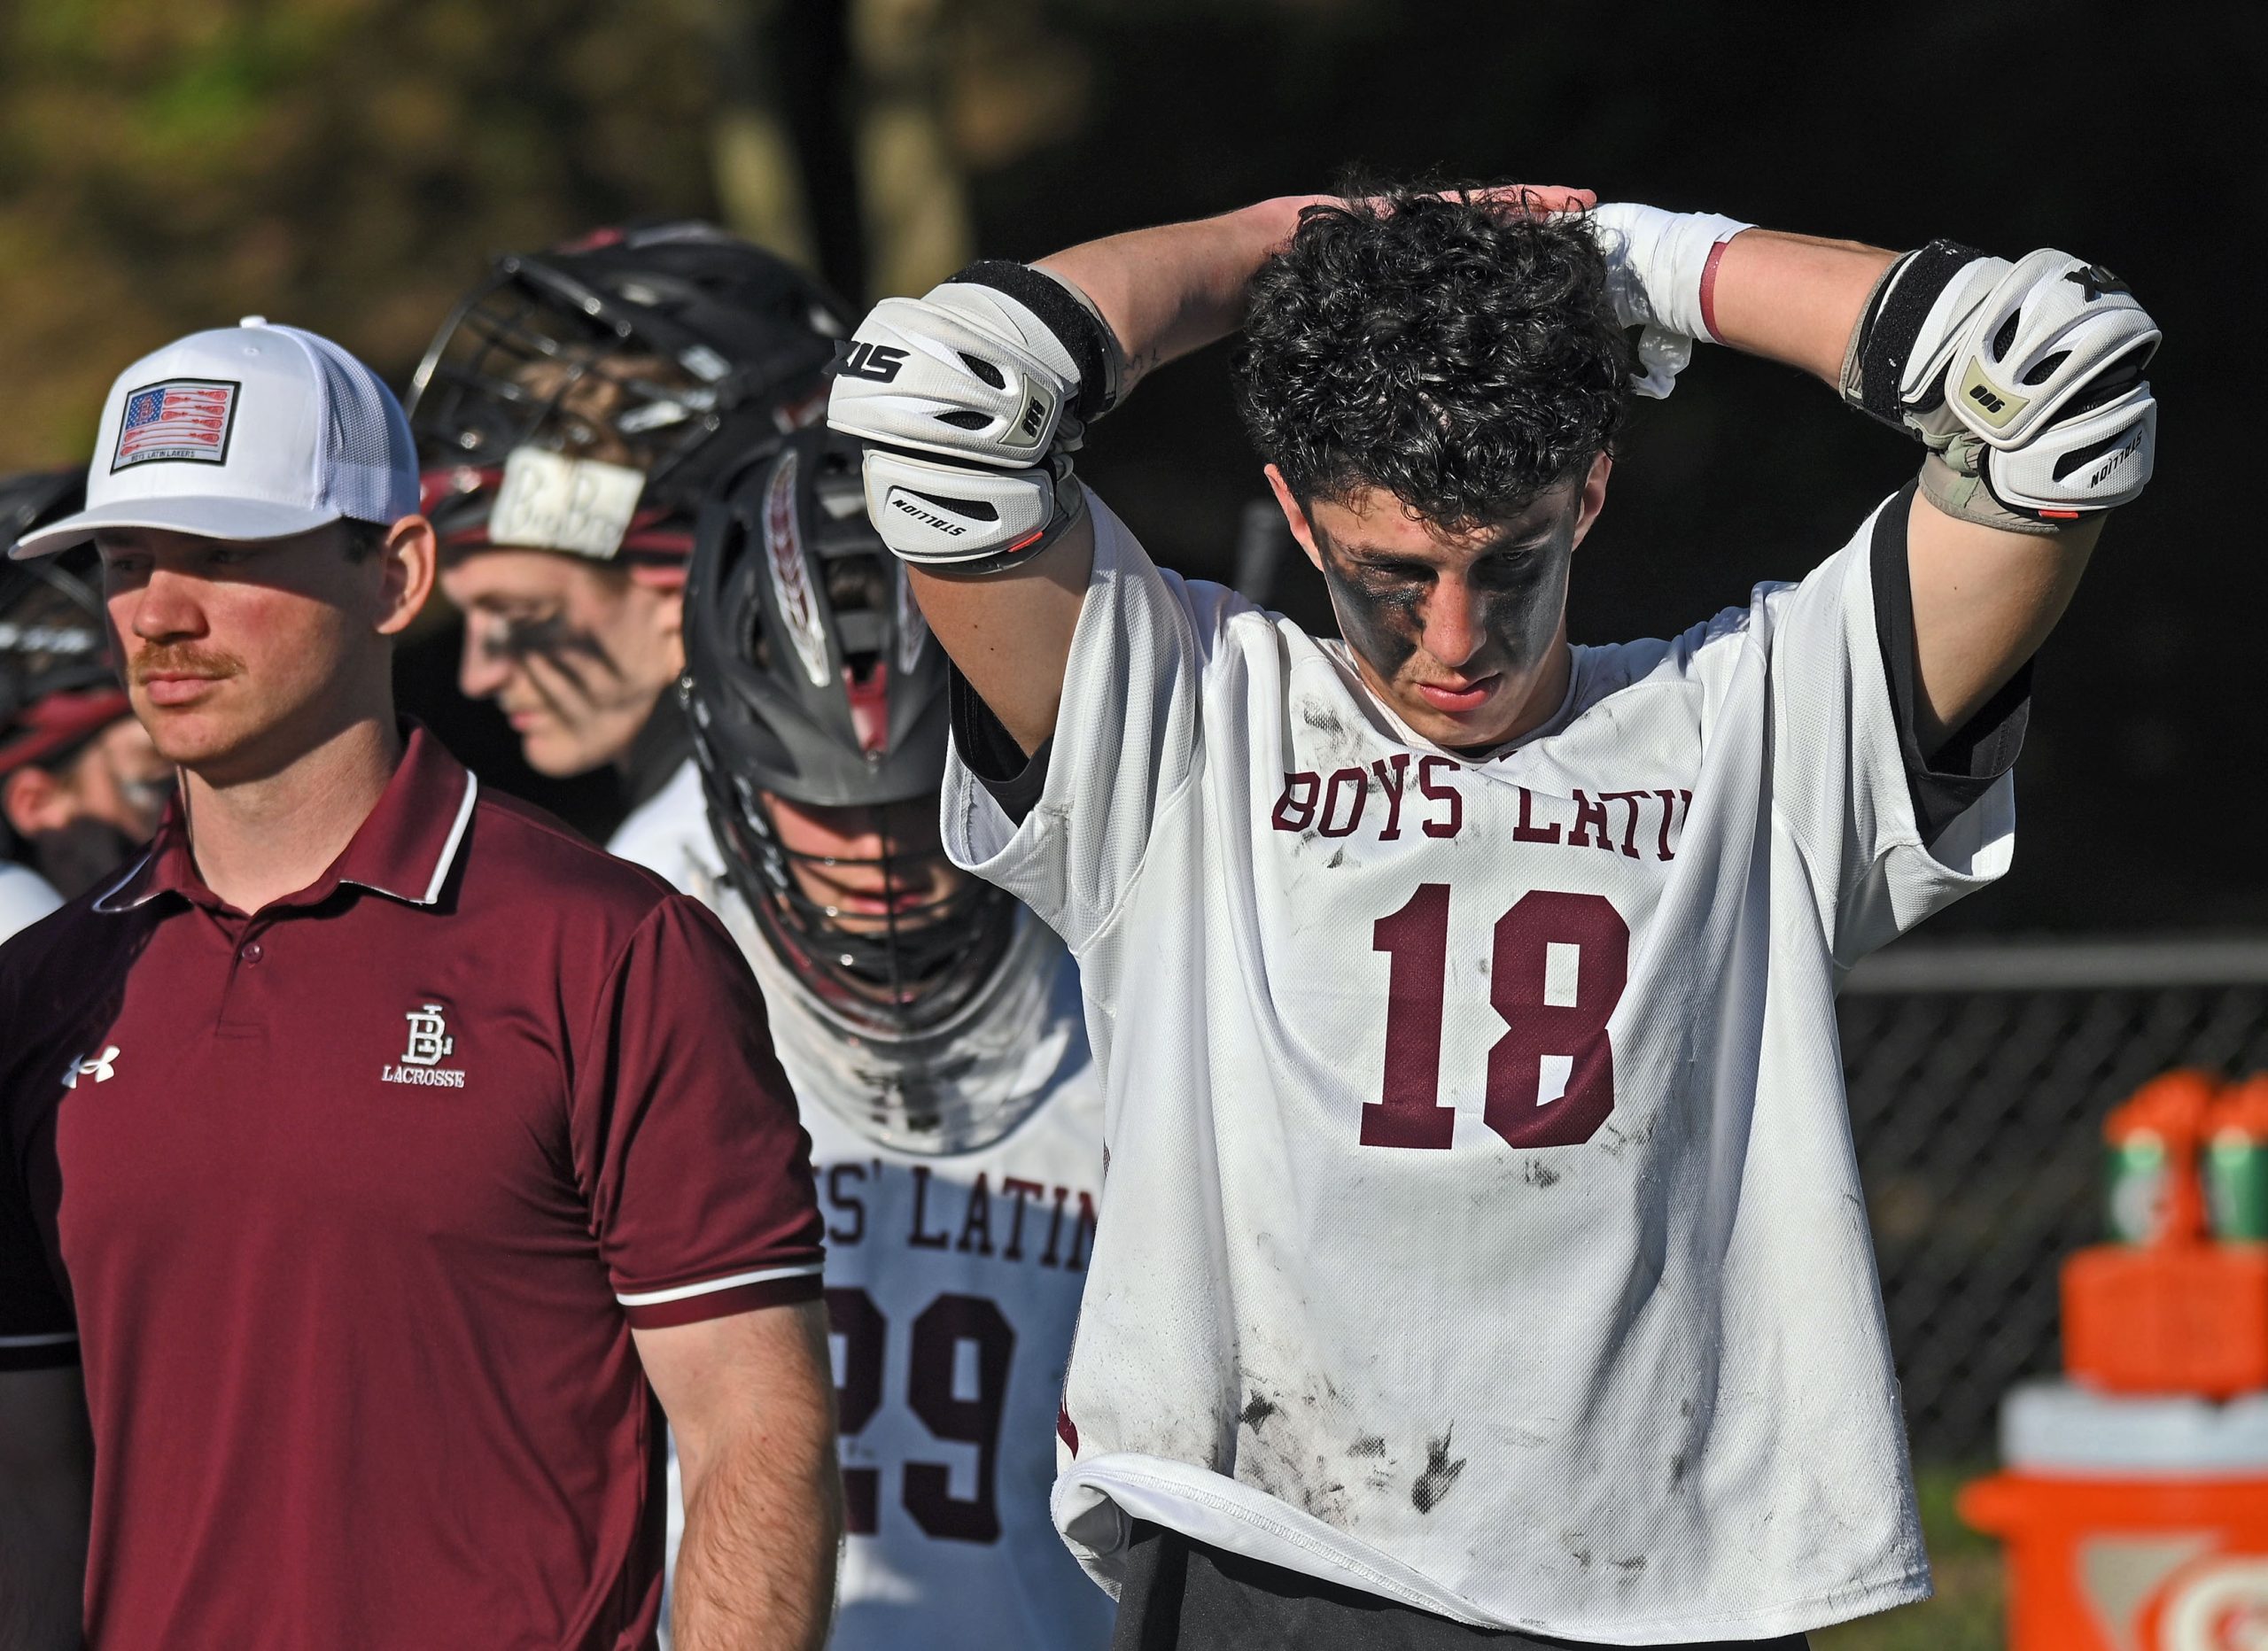 Boys’ Latin’s Spencer Ford, right, reacts in dejection after 12-10...